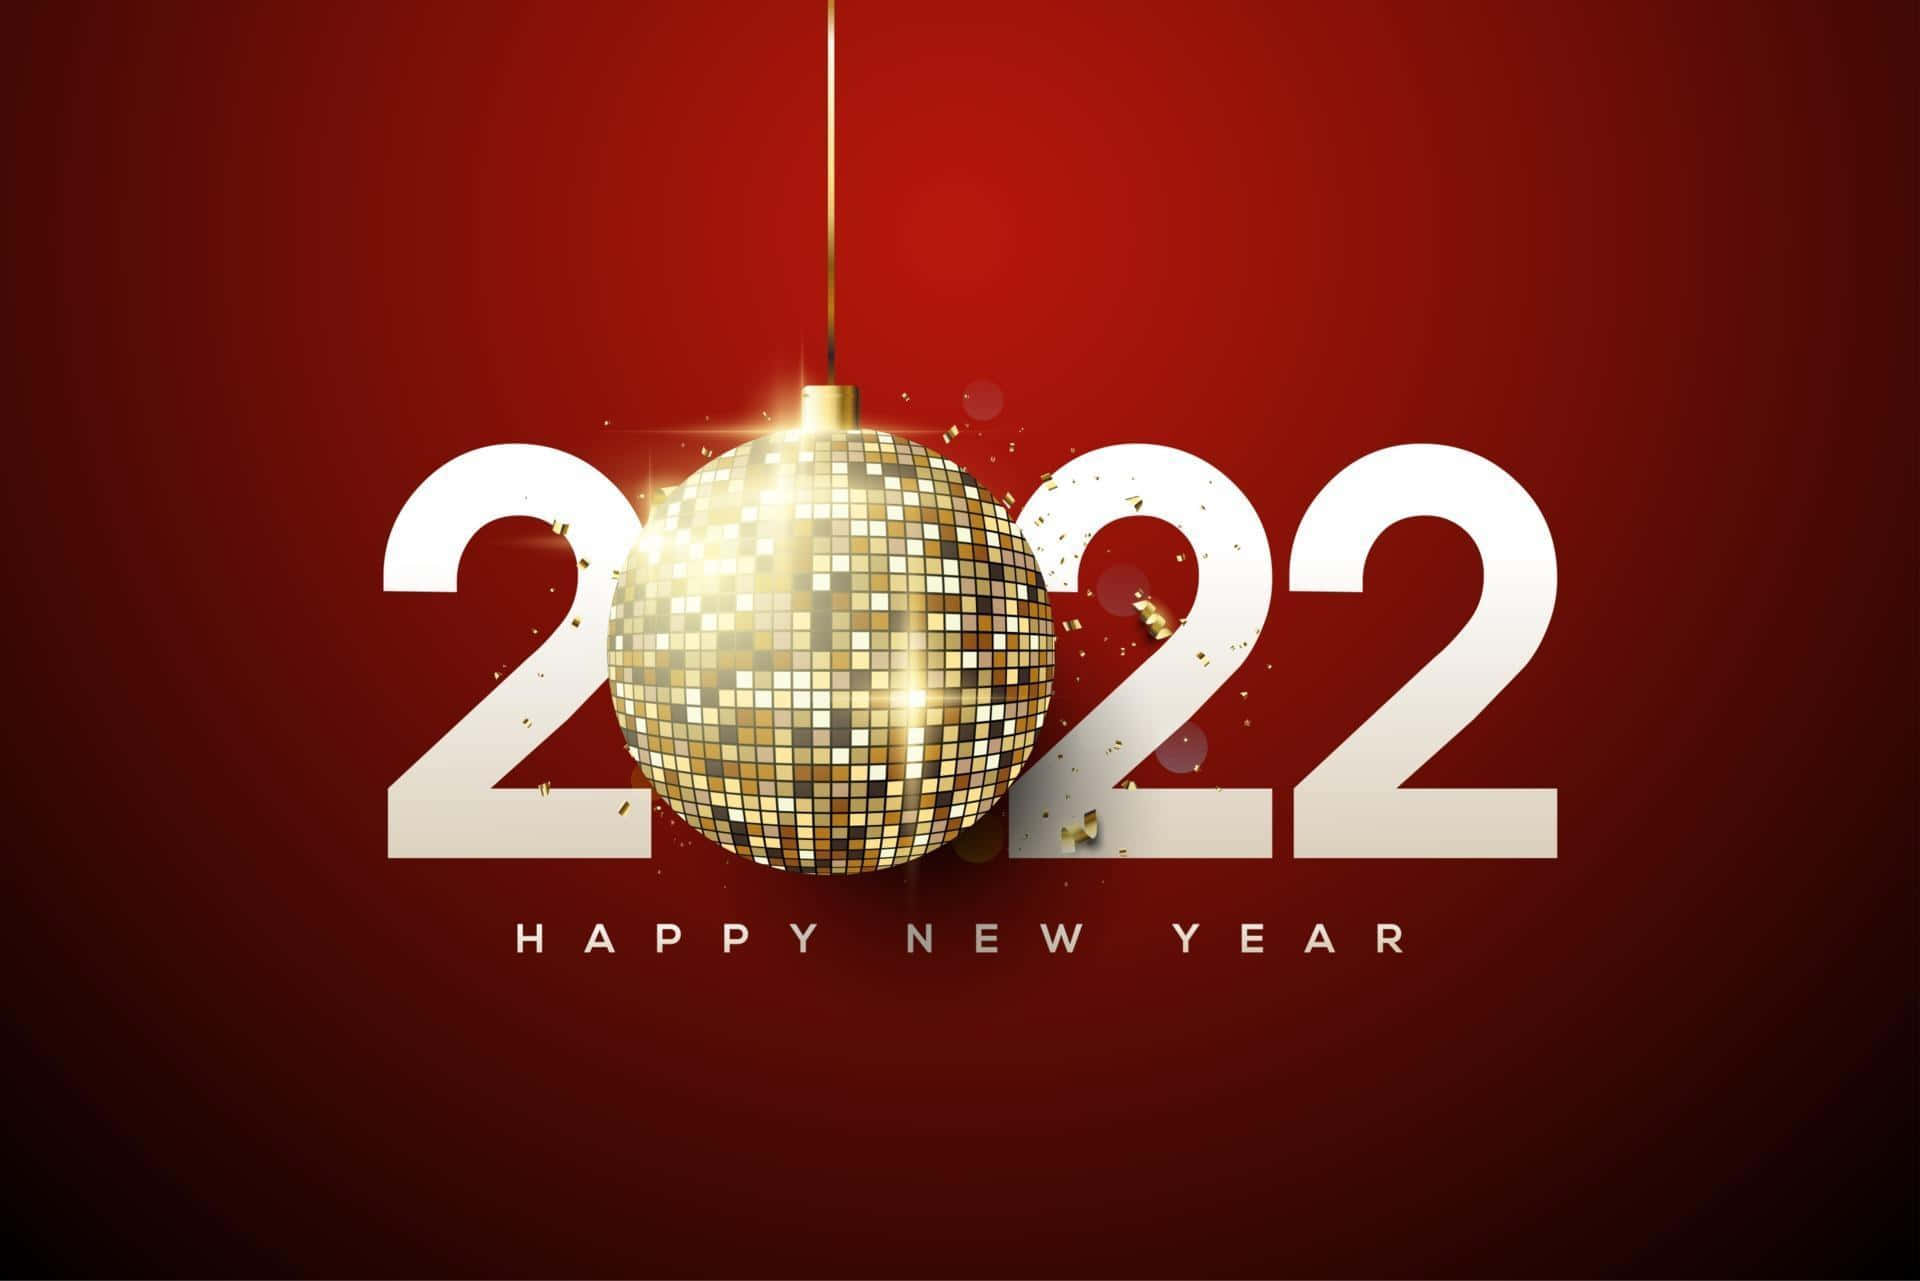 Happy New Year 2020 With Golden Ball And Ball